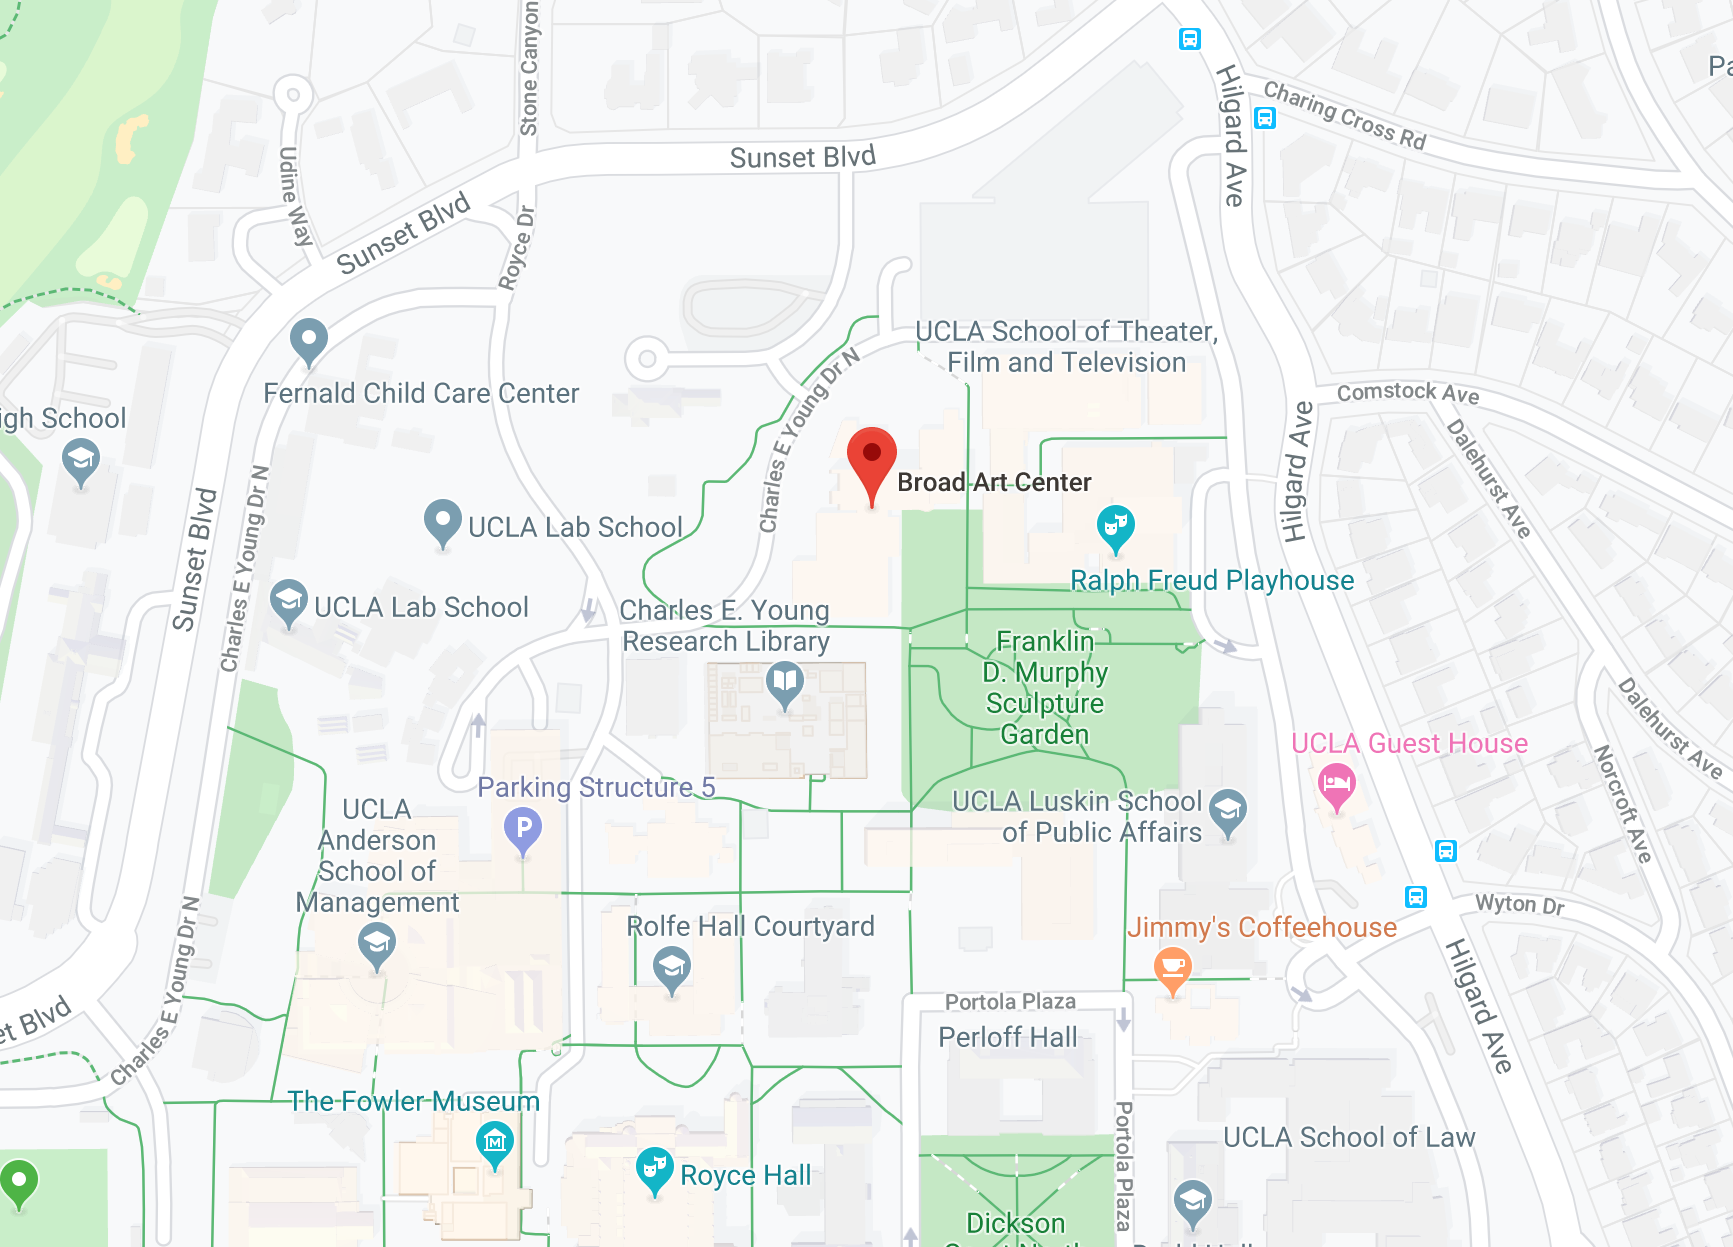 Map of UCLA Campus showing a pin at the broad building.